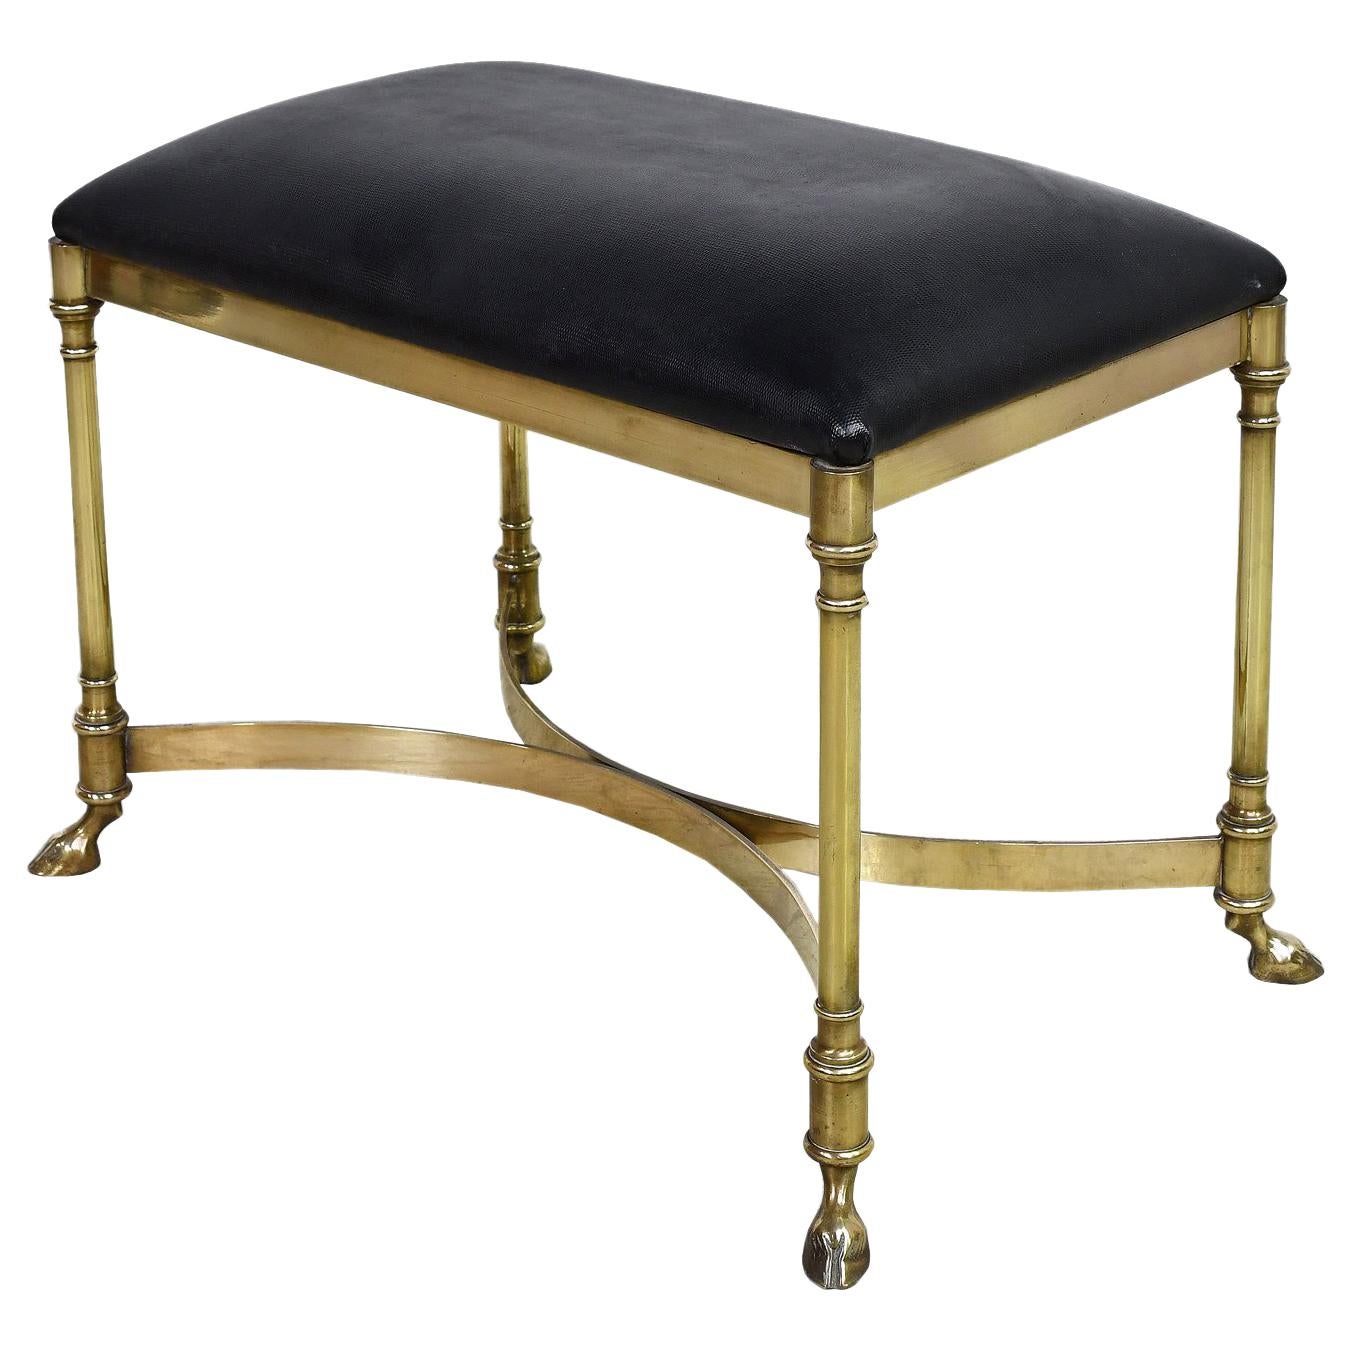 Neoclassical-Style Vintage Italian Stool w/ Brass Frame & Black Upholstered Seat